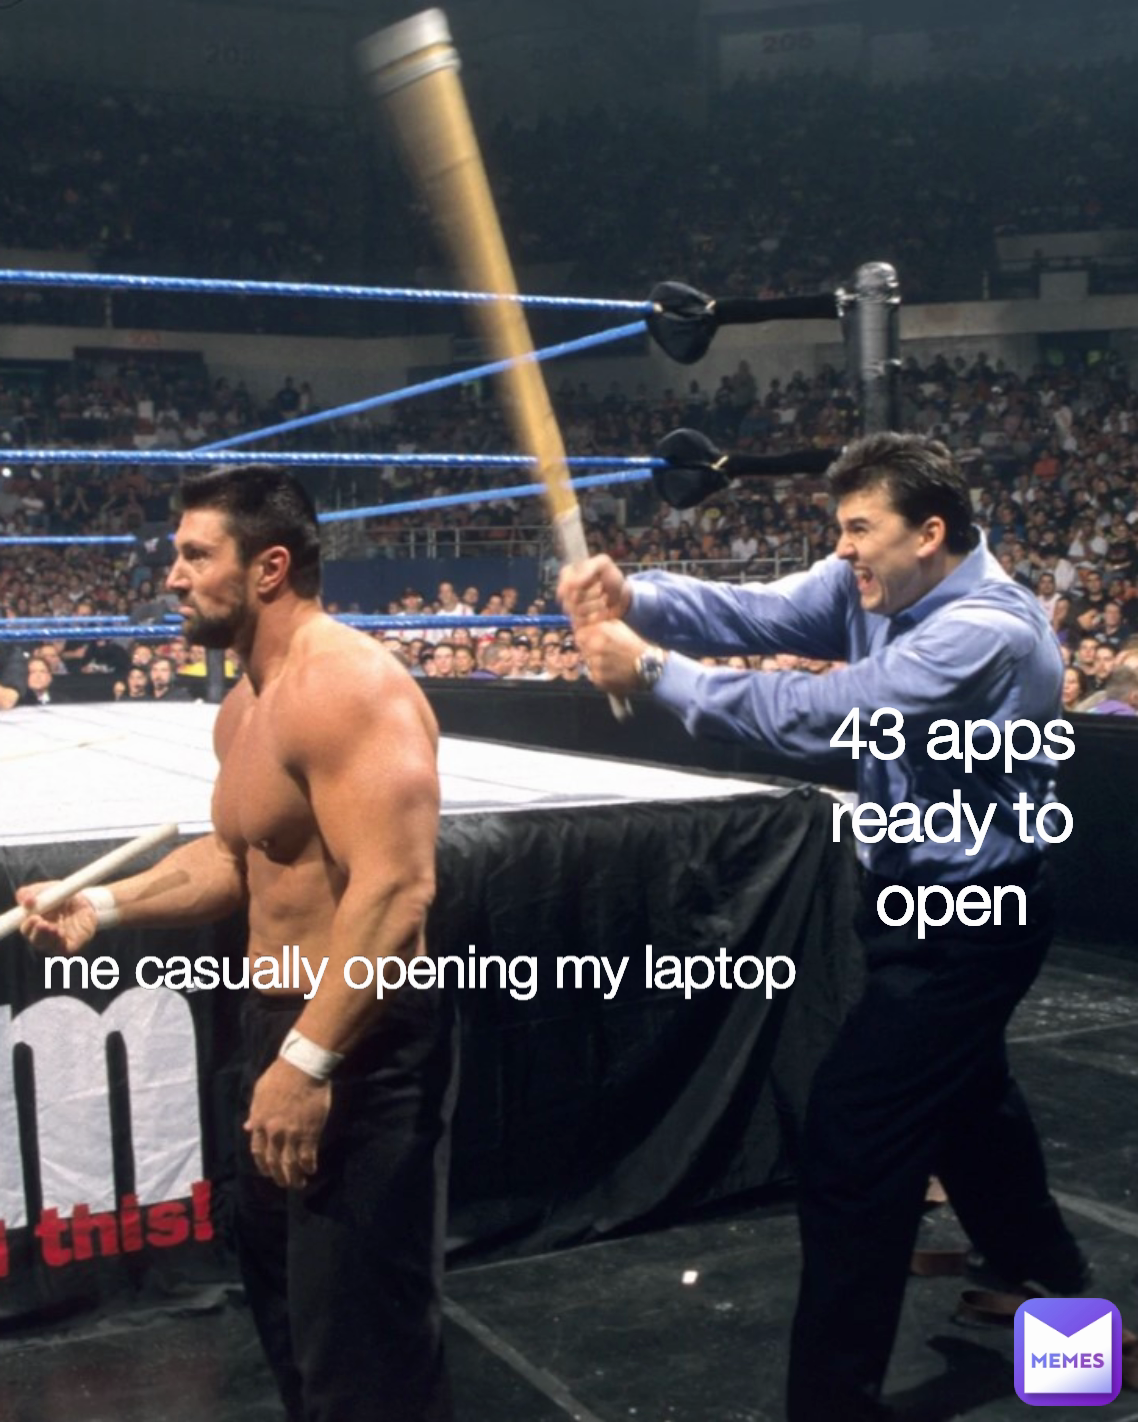 43 apps ready to open me casually opening my laptop